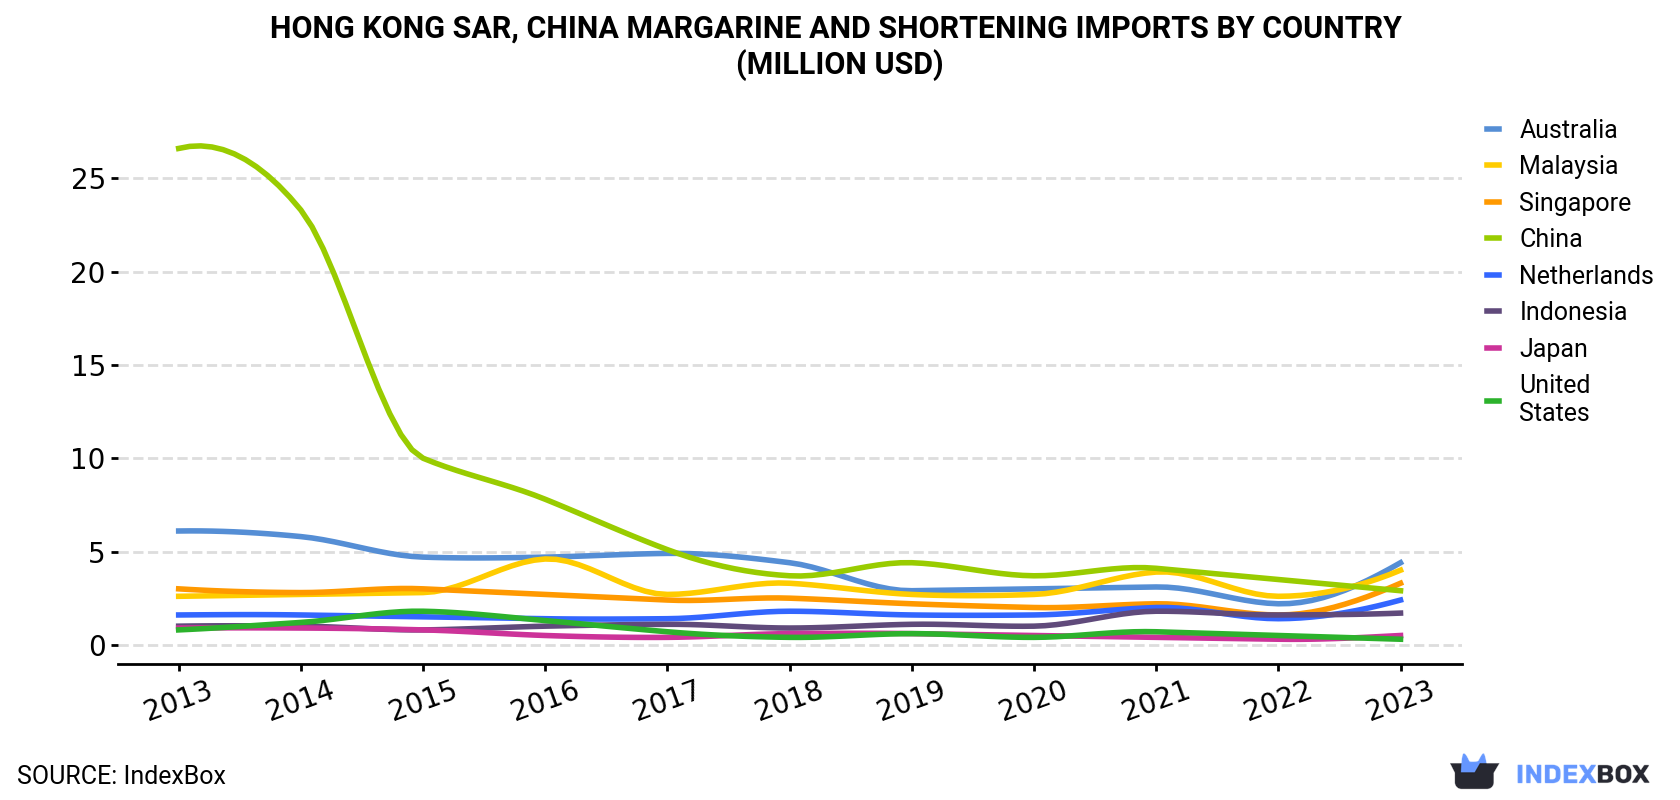 Hong Kong Margarine And Shortening Imports By Country (Million USD)